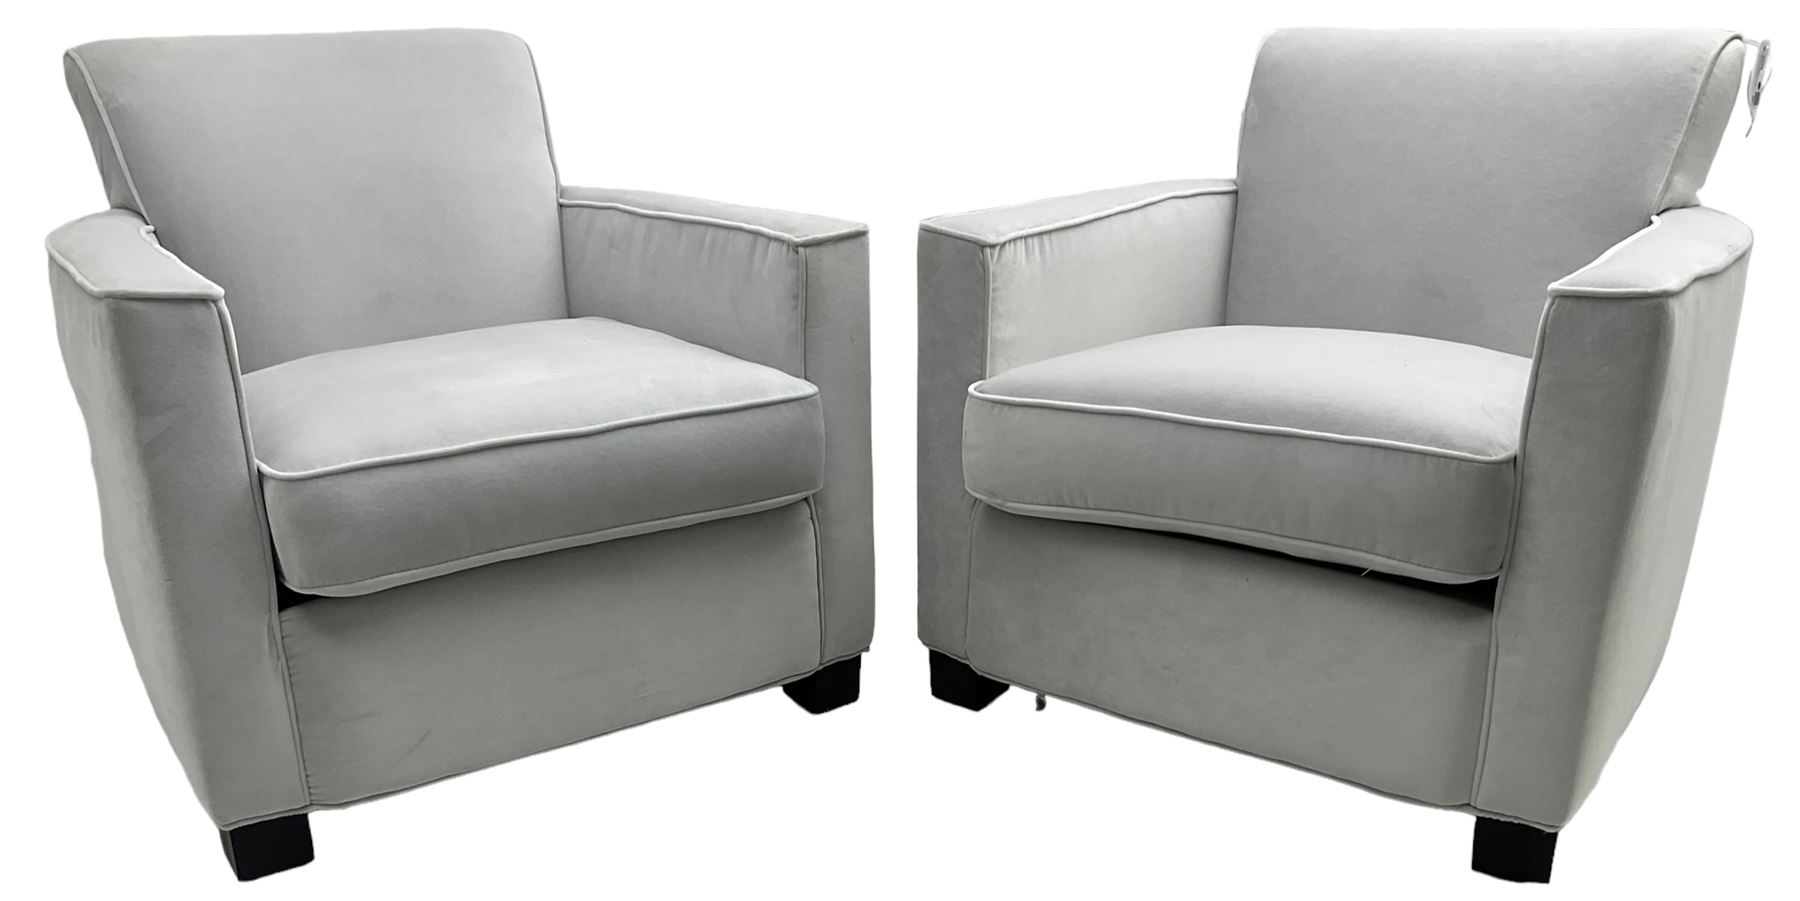 India Jane Interiors - 'Savoy' pair of contemporary armchairs upholstered in light grey velvet fabri - Image 2 of 7